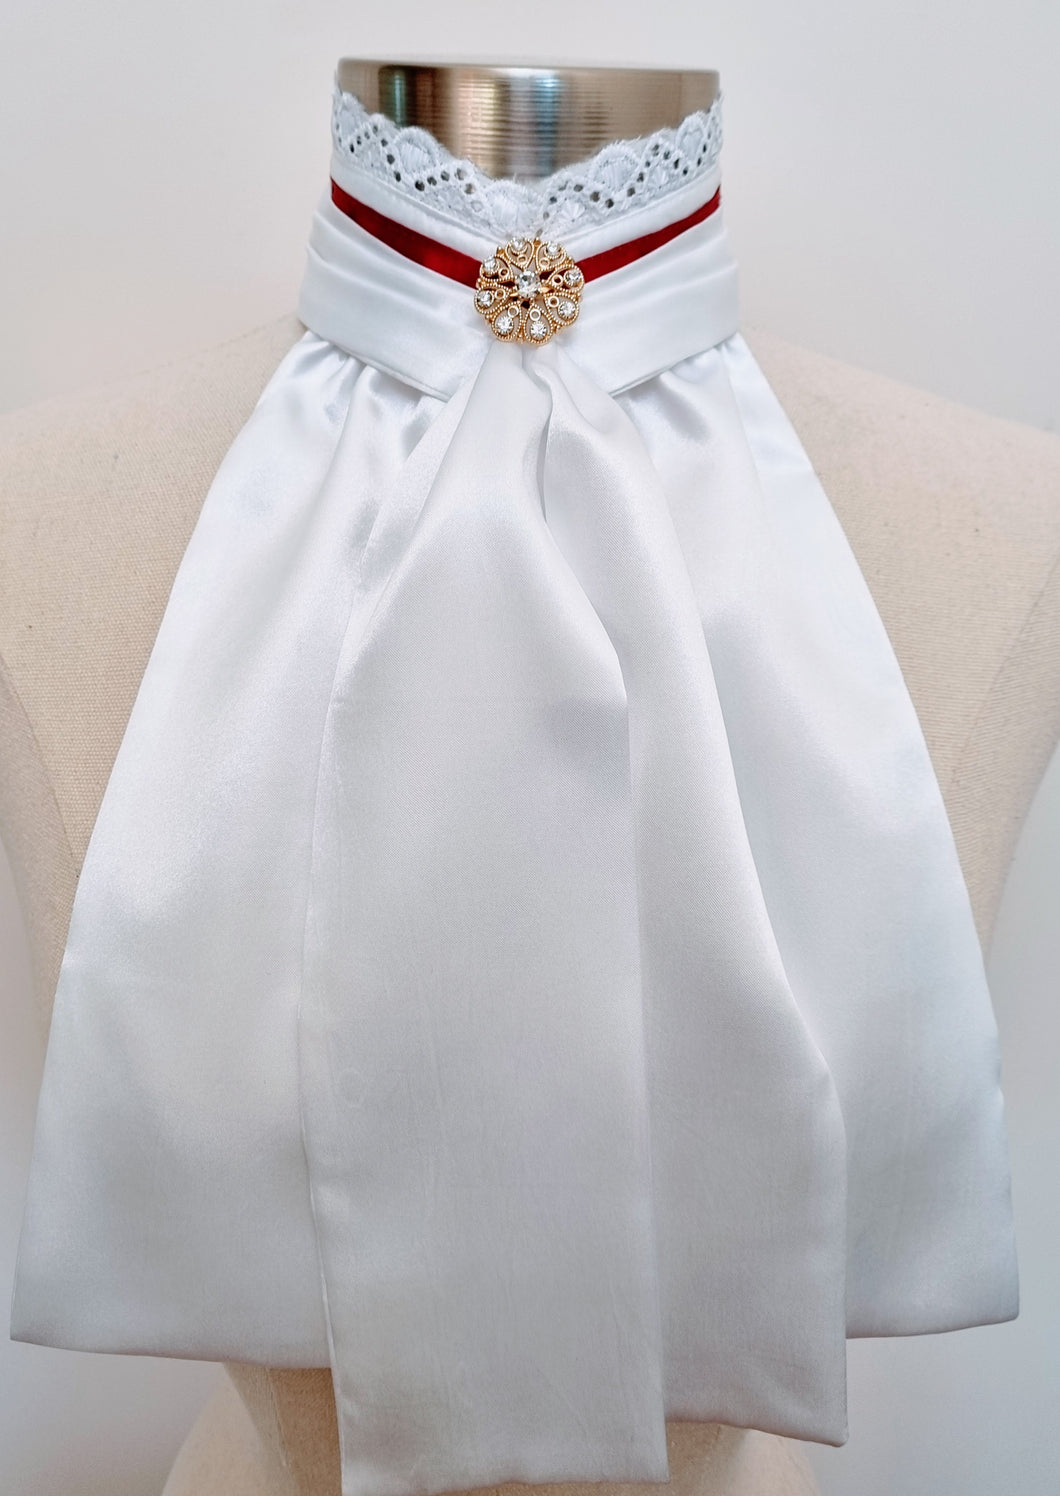 ERA EURO BELLE STOCK TIE - White lustre satin with lace frill and brooch - Coloured trim - burgundy, navy, royal blue, Black